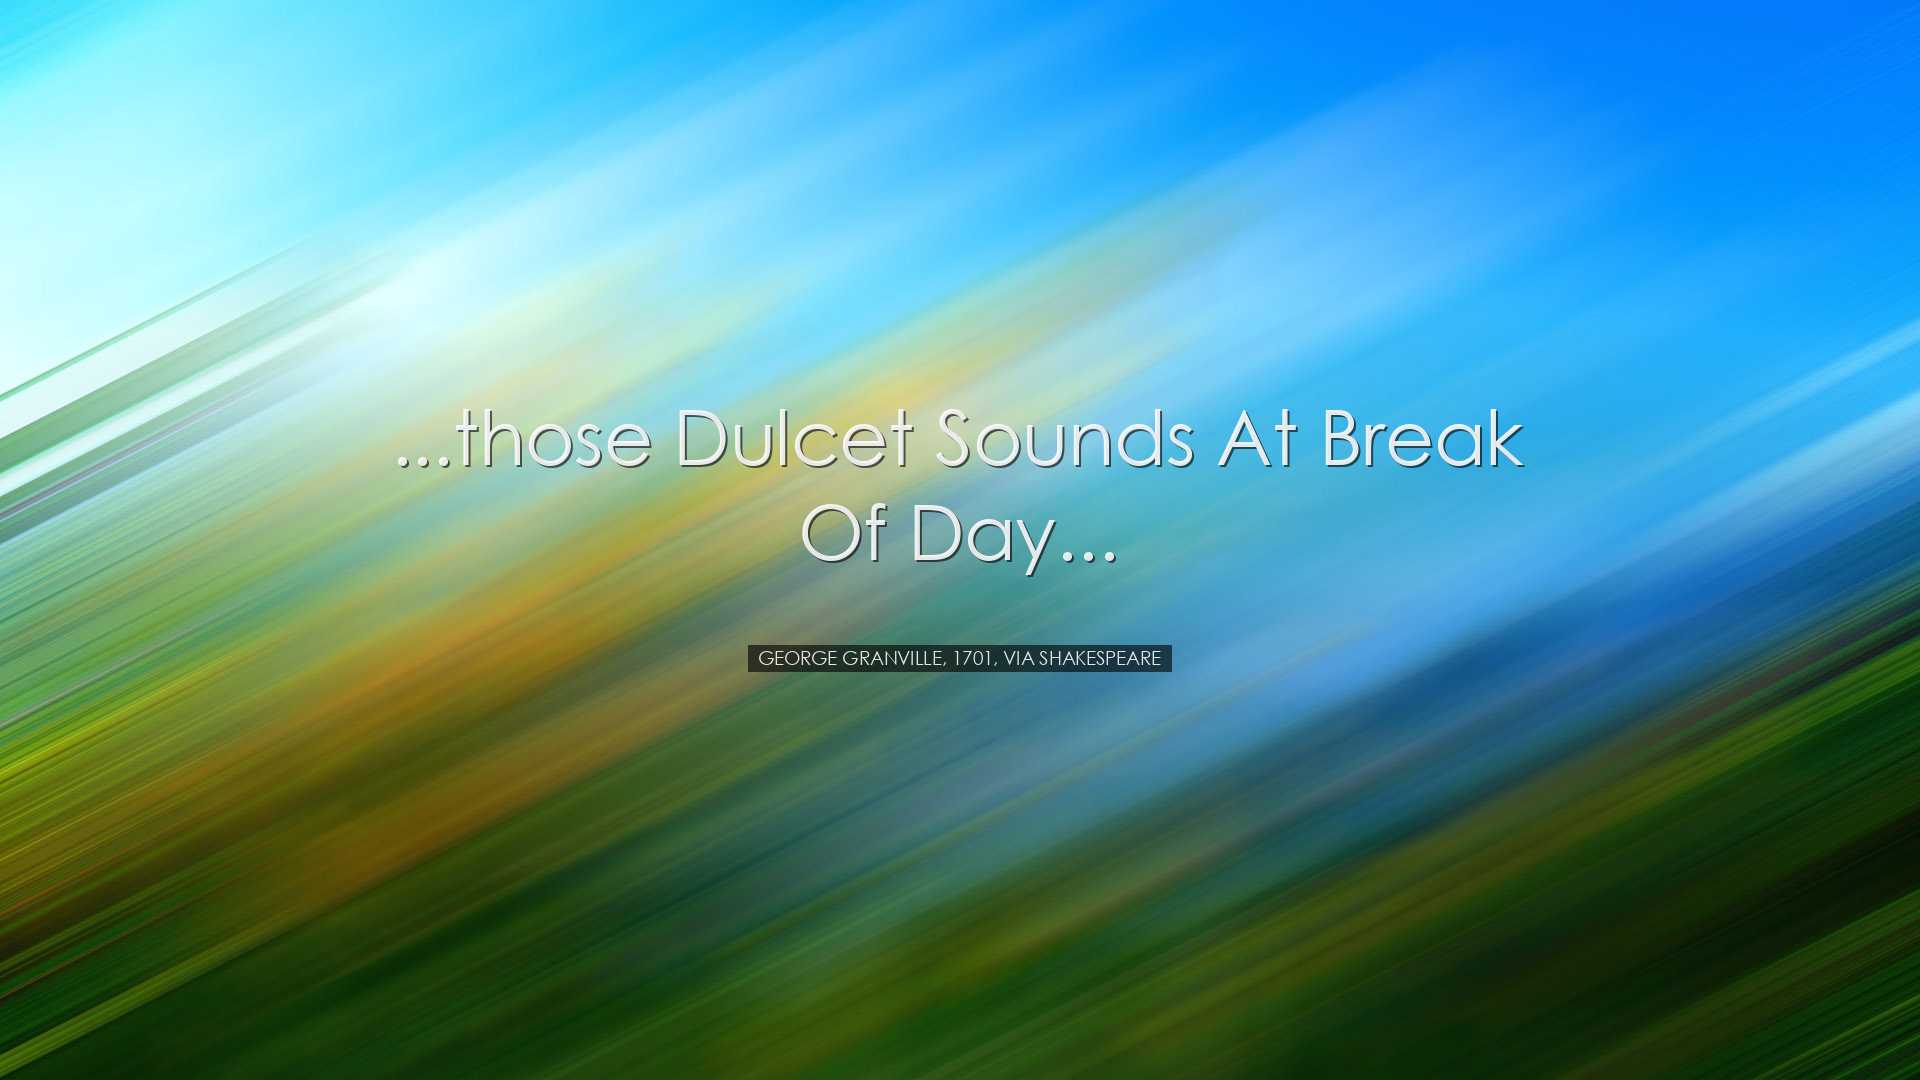 ...those dulcet sounds at break of day... - George Granville, 1701